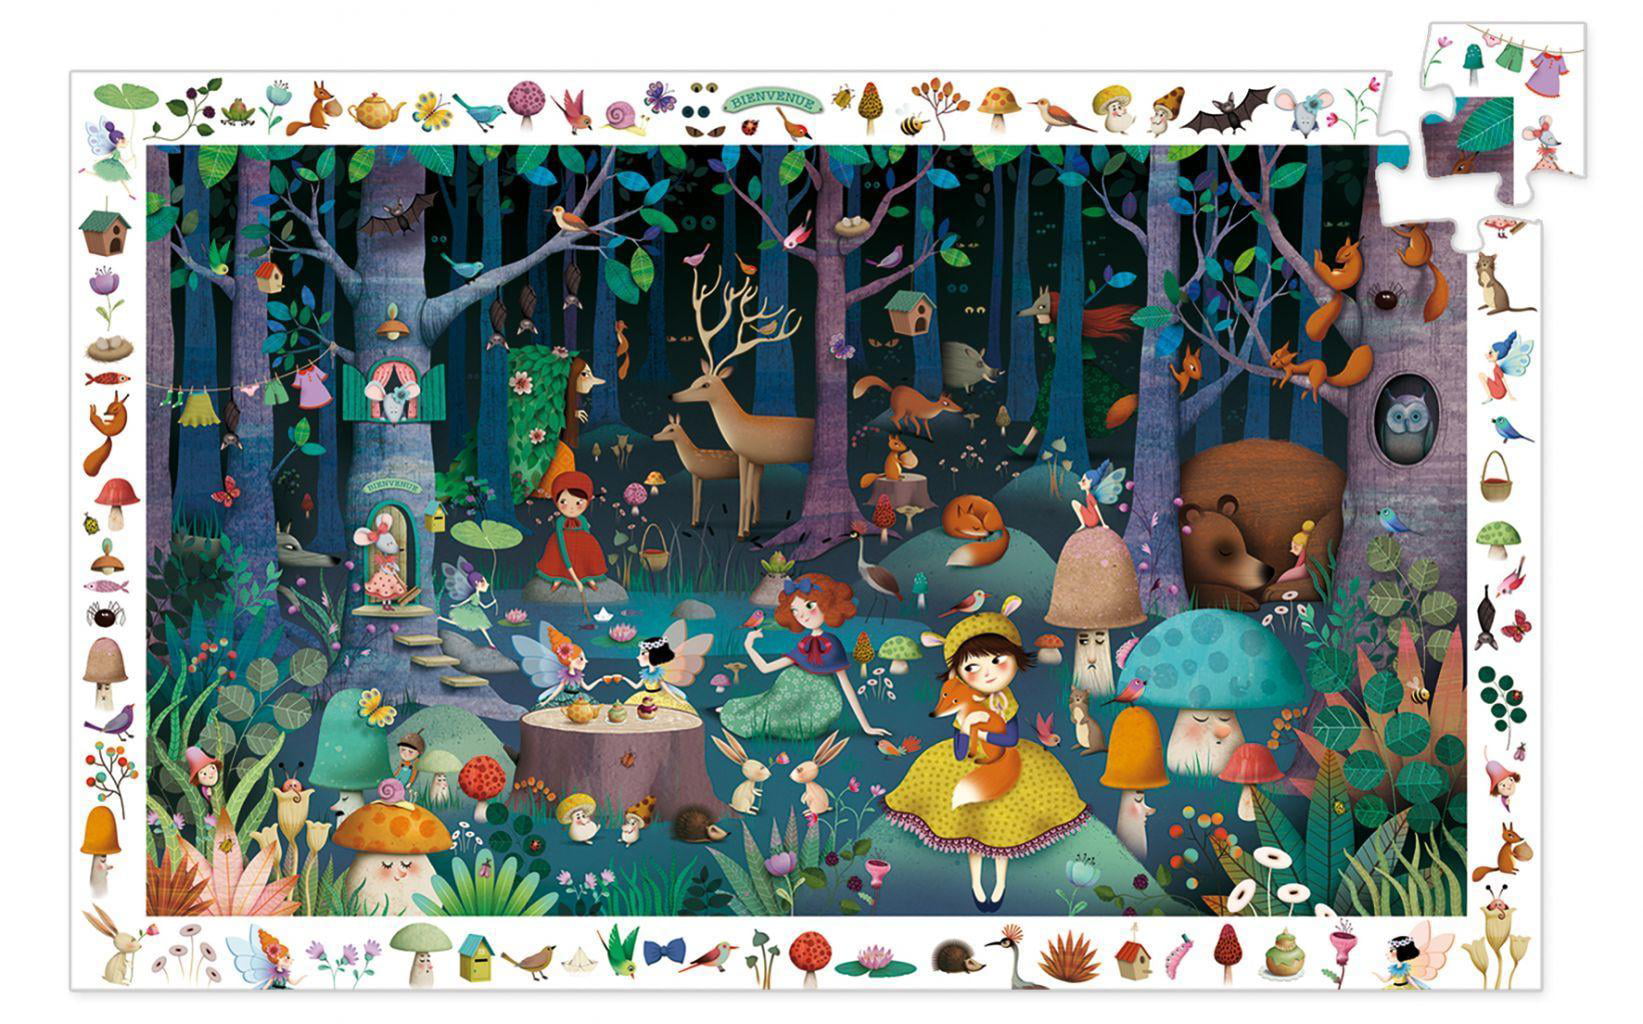 Enchanted Forest, a 100-piece Puzzle by Djeco